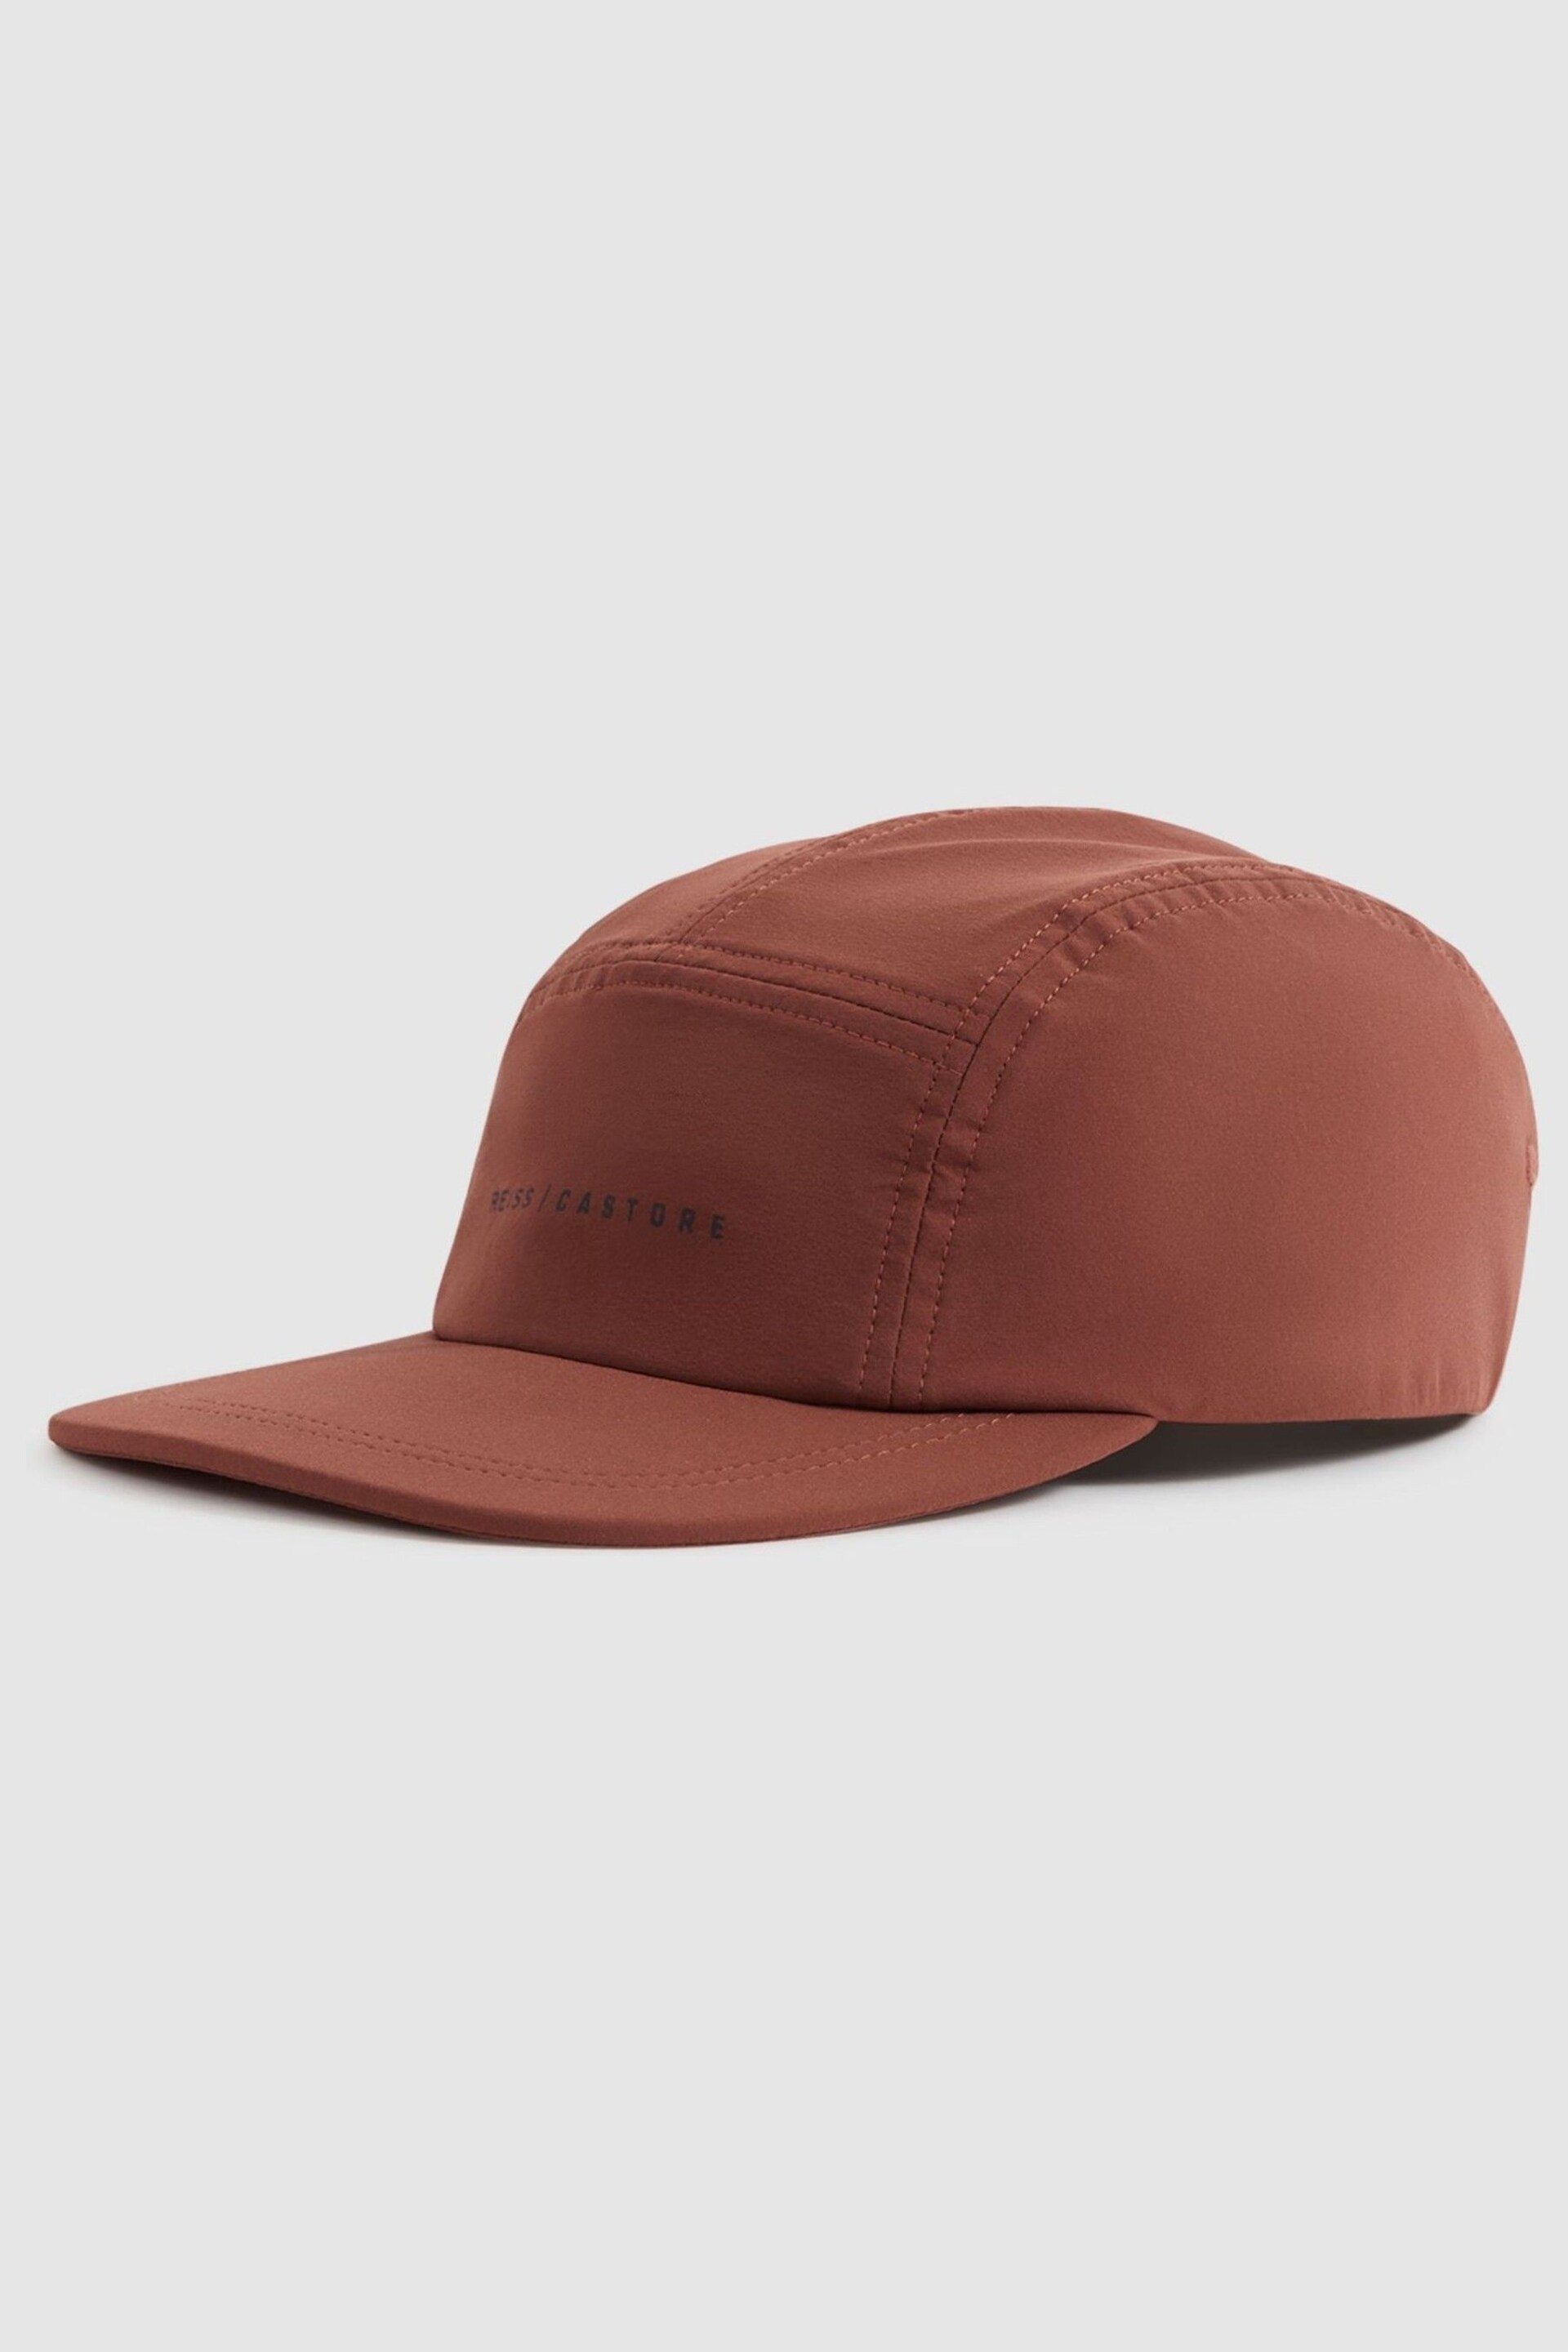 Reiss Rust Remy Castore Water Repellent Baseball Cap - Image 1 of 4